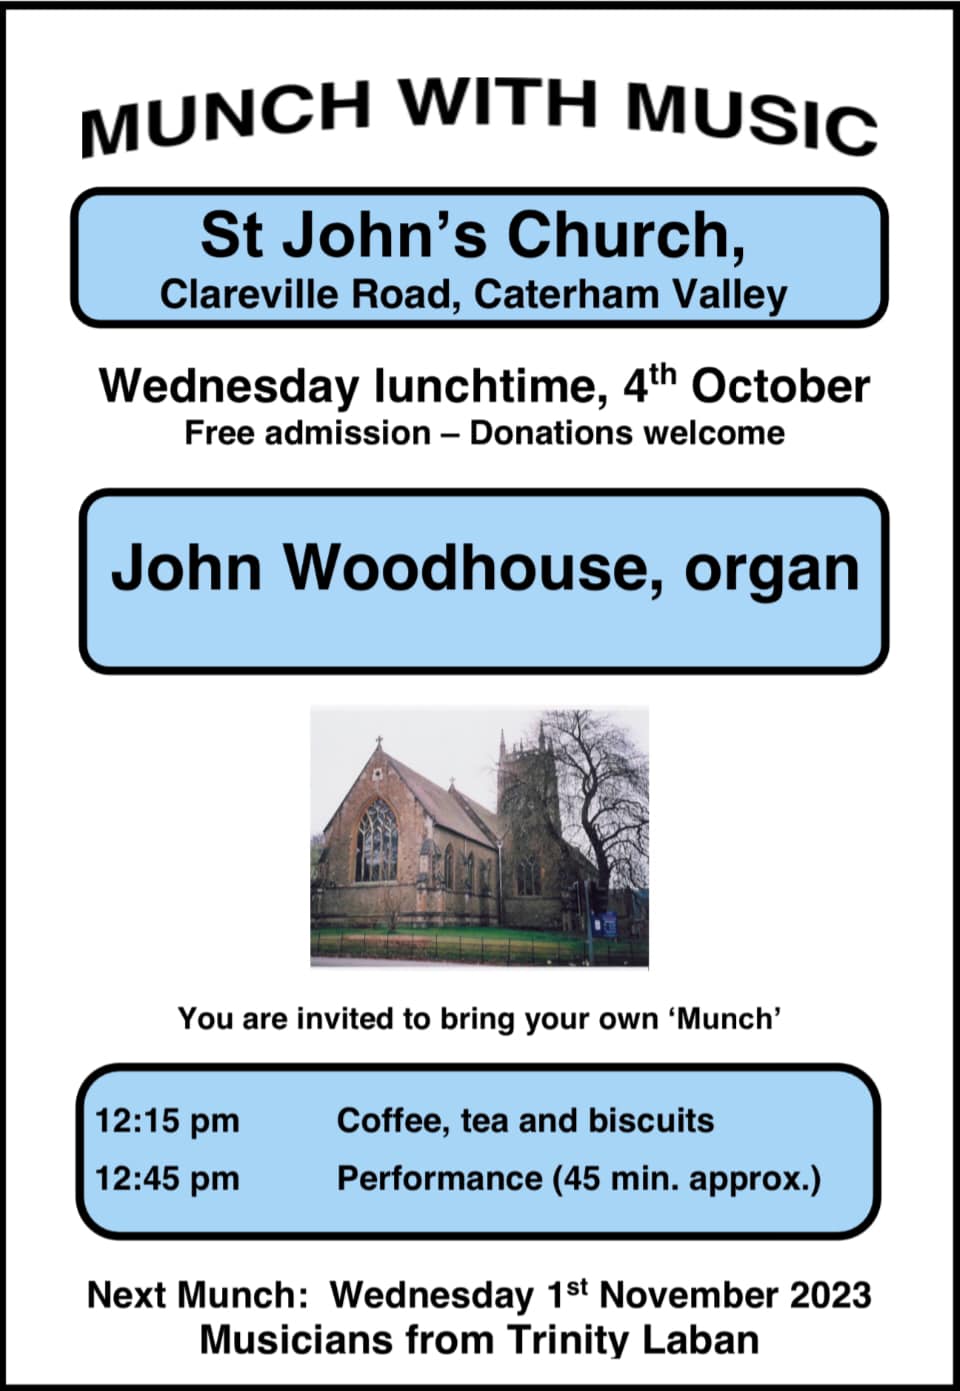 Munch with Music October 2023 poster. John Woodhouse gives a church organ recital from 12:45pm.